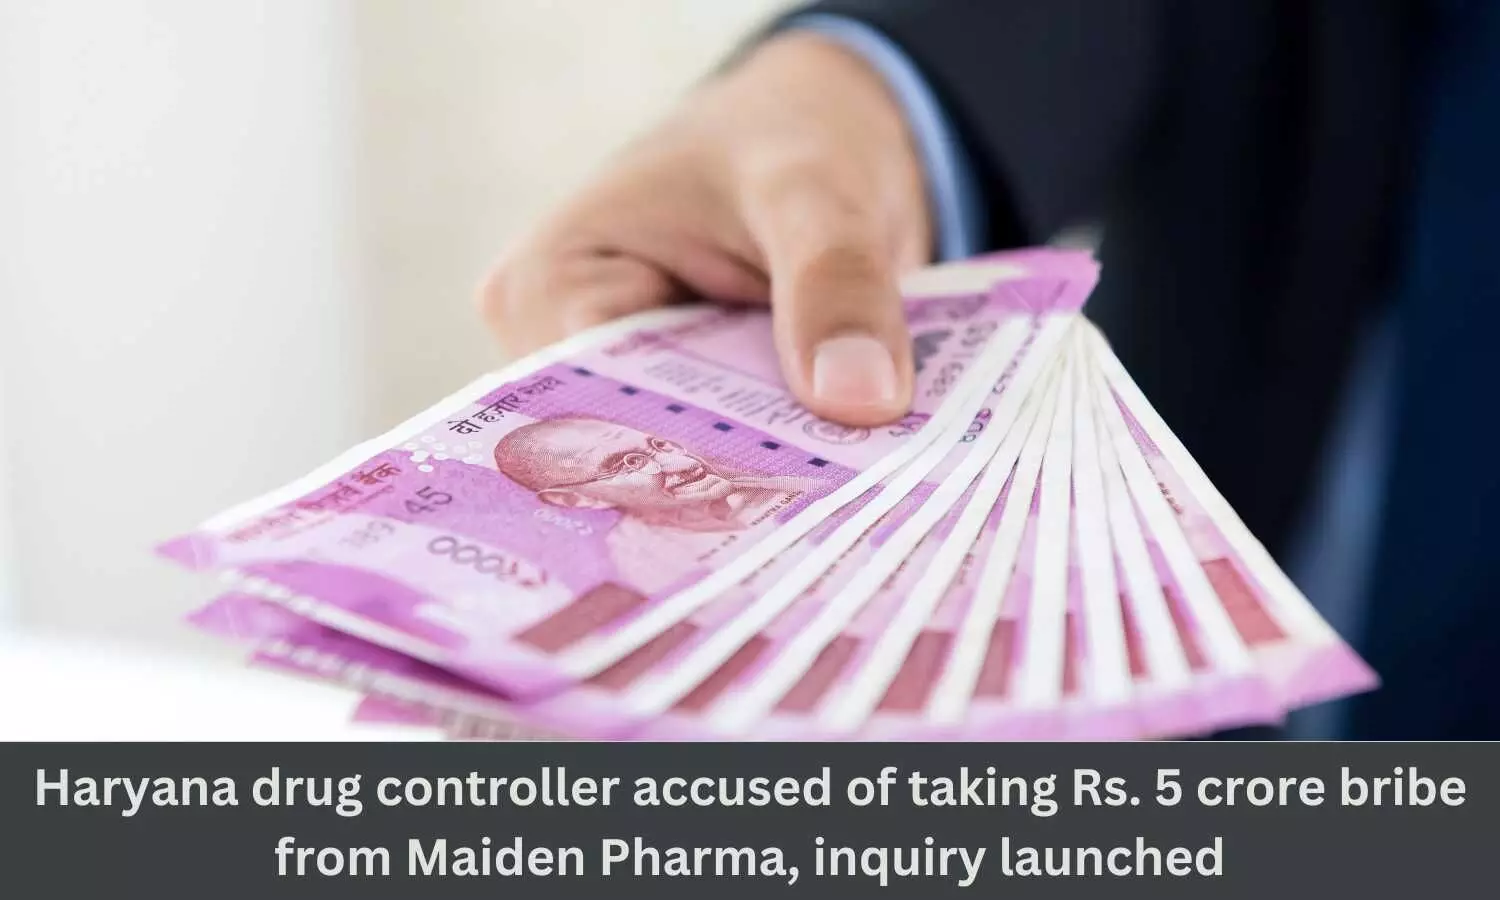 Haryana drug controller accused of taking Rs 5 crore bribe from Maiden Pharma